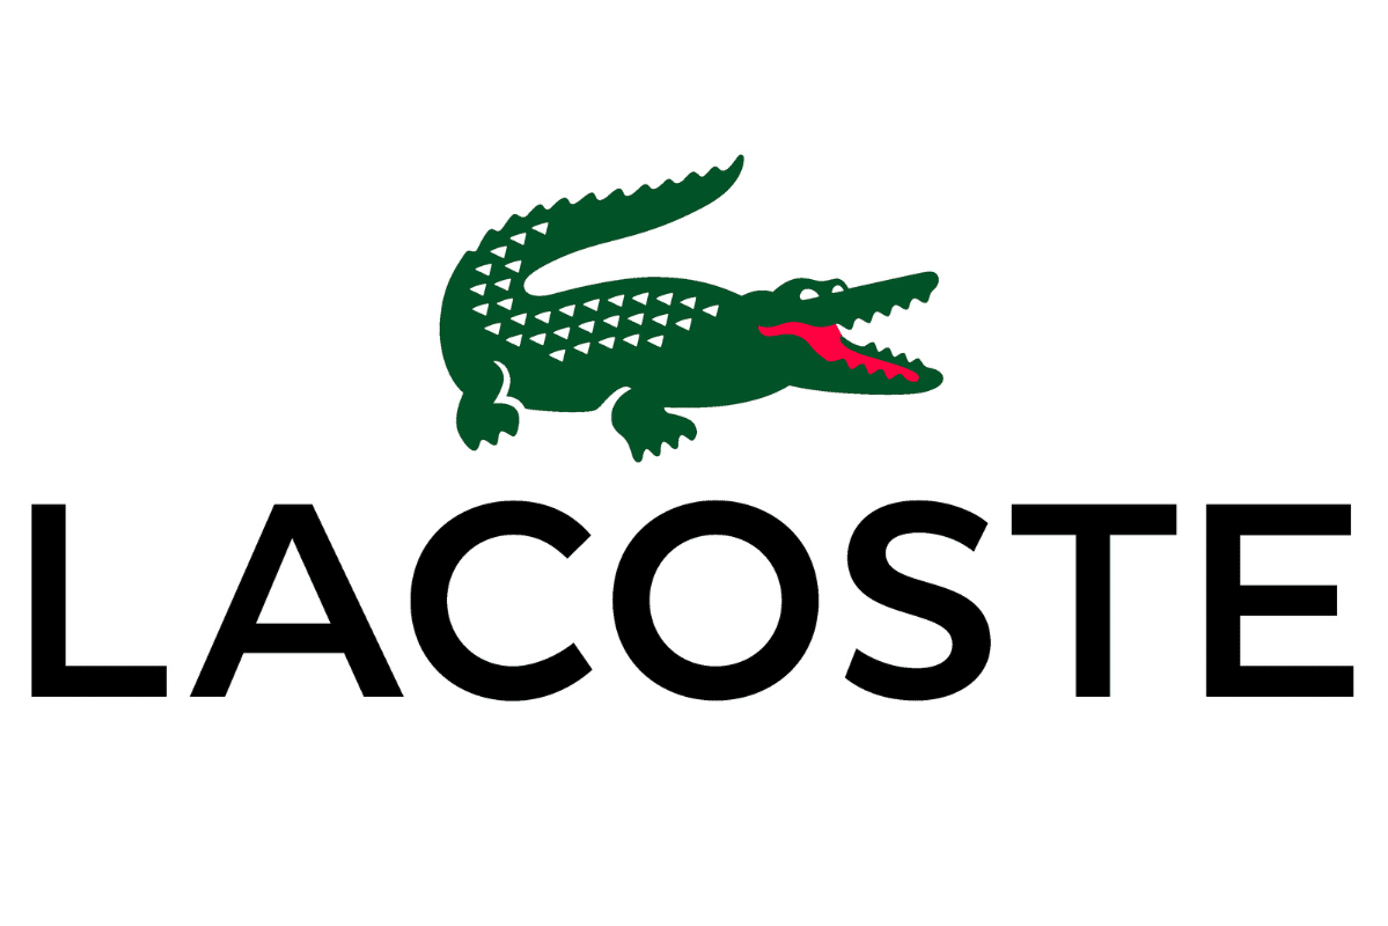 Lacoste buys back fragrance license and signs Interparfums